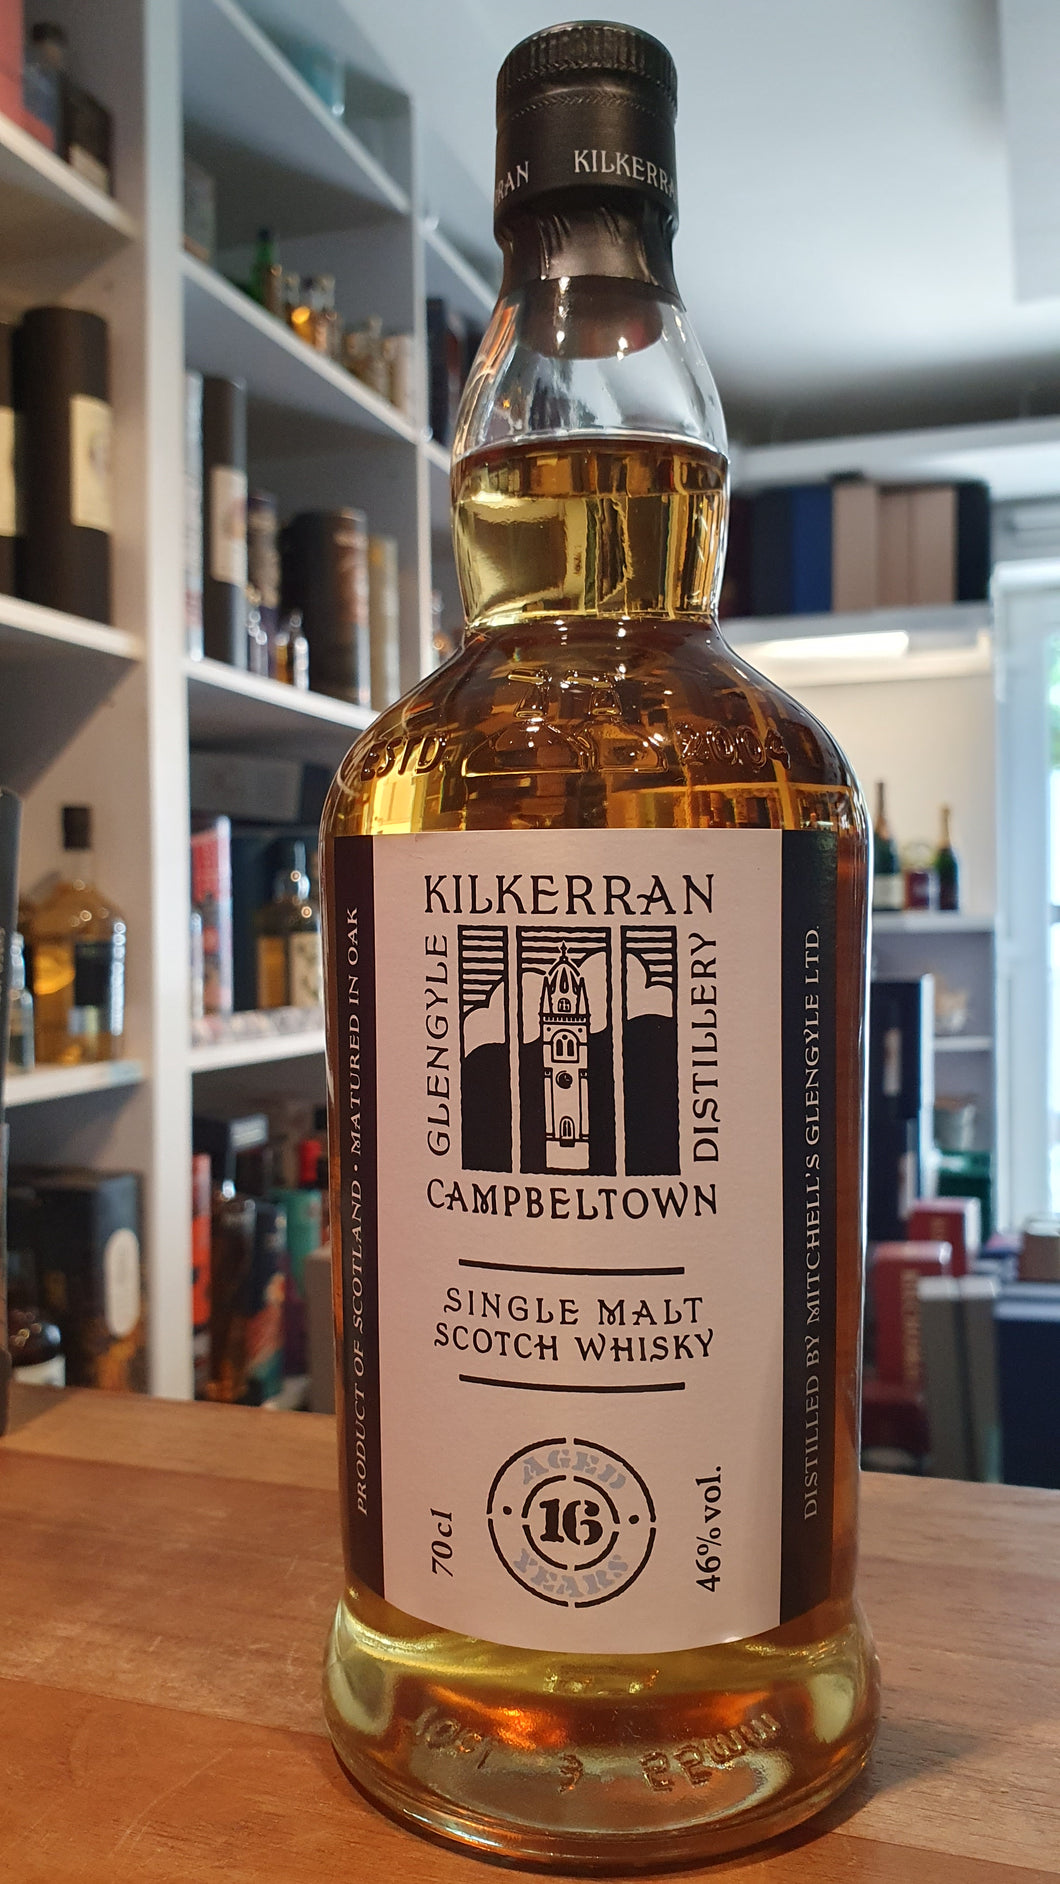 Kilkerran 16y 2023 0,7l 46%vol. Schottland Campbeltown Casks: 75% Bourbon, 25% Sherry Mitchell’s Glengyle Distillery

 
Nose: We are welcomed to this dram with notes of Iberico ham, along with notes of tinned pineapple, green apples and demerara sugar.

Palate: Coastal notes reminiscent of the seaside and shingle beaches, along with hints of lemon yoghurt, ground pepper and a touch of peat smoke.

Finish: freshness in the finish peat smoke  toasted marshmallows